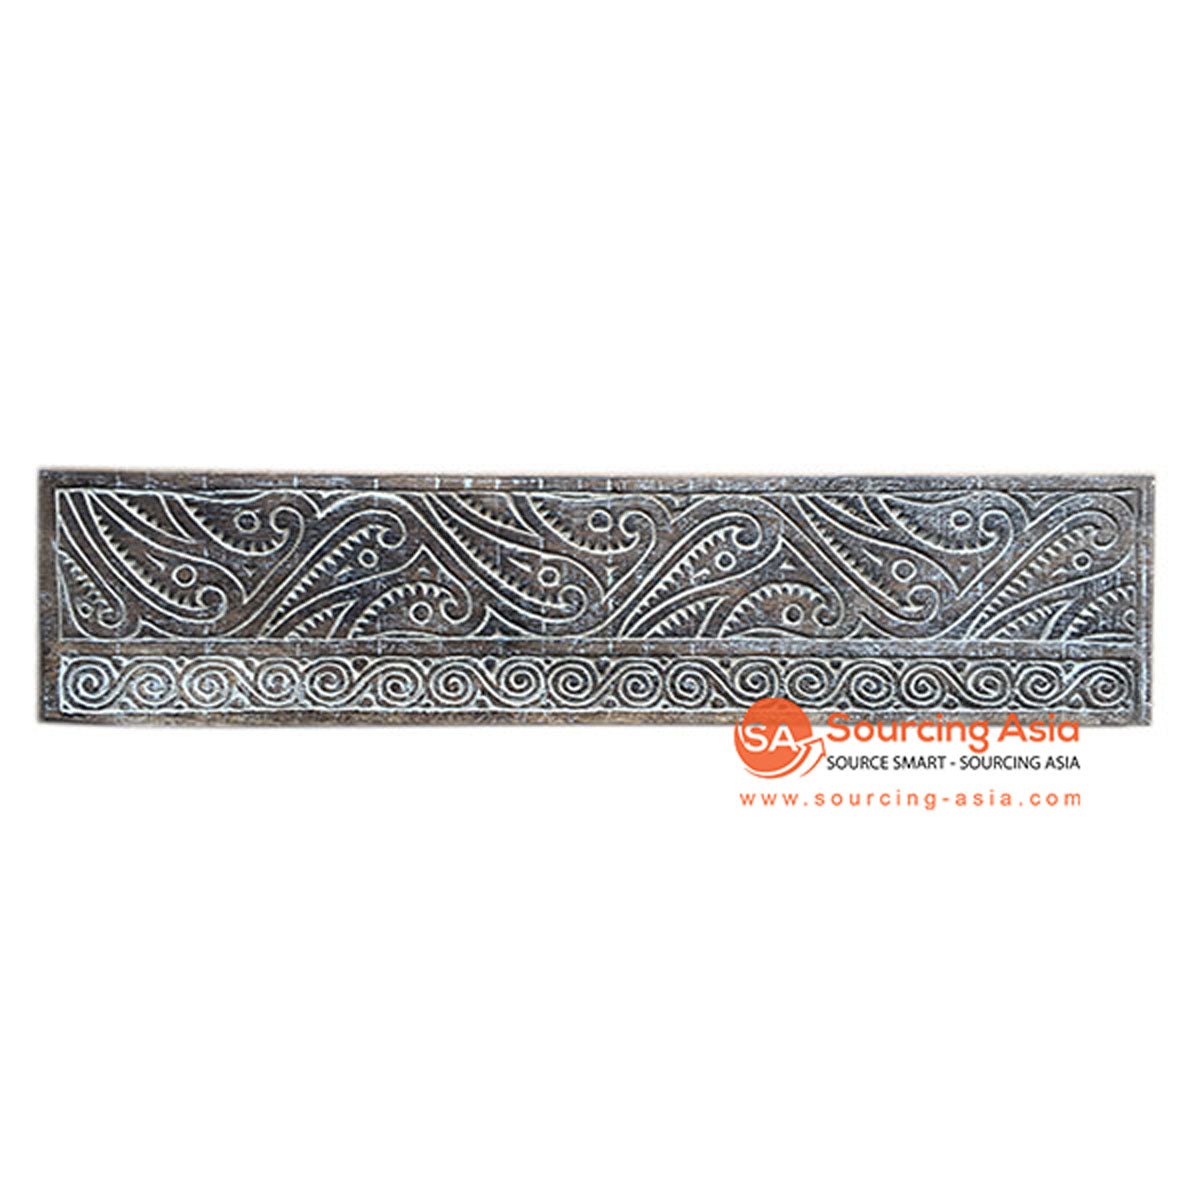 SHL075-8 WHITE WASH WOODEN CARVED WALL HOOK